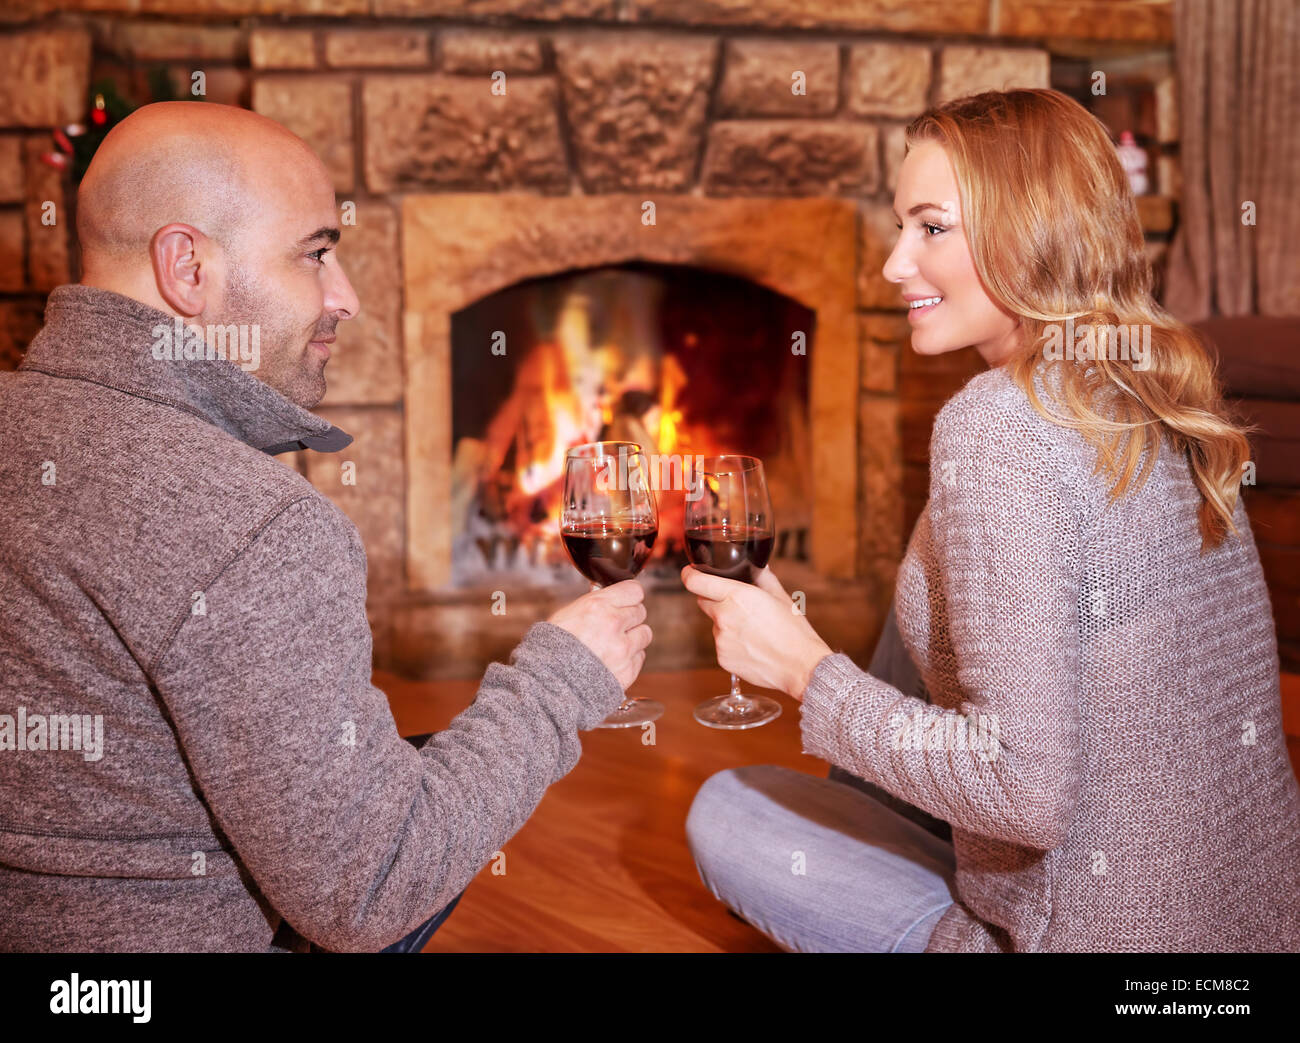 Side view of happy cheerful couple sitting on the floor near fireplace, clinking glasses with tasty red wine, enjoying romance Stock Photo